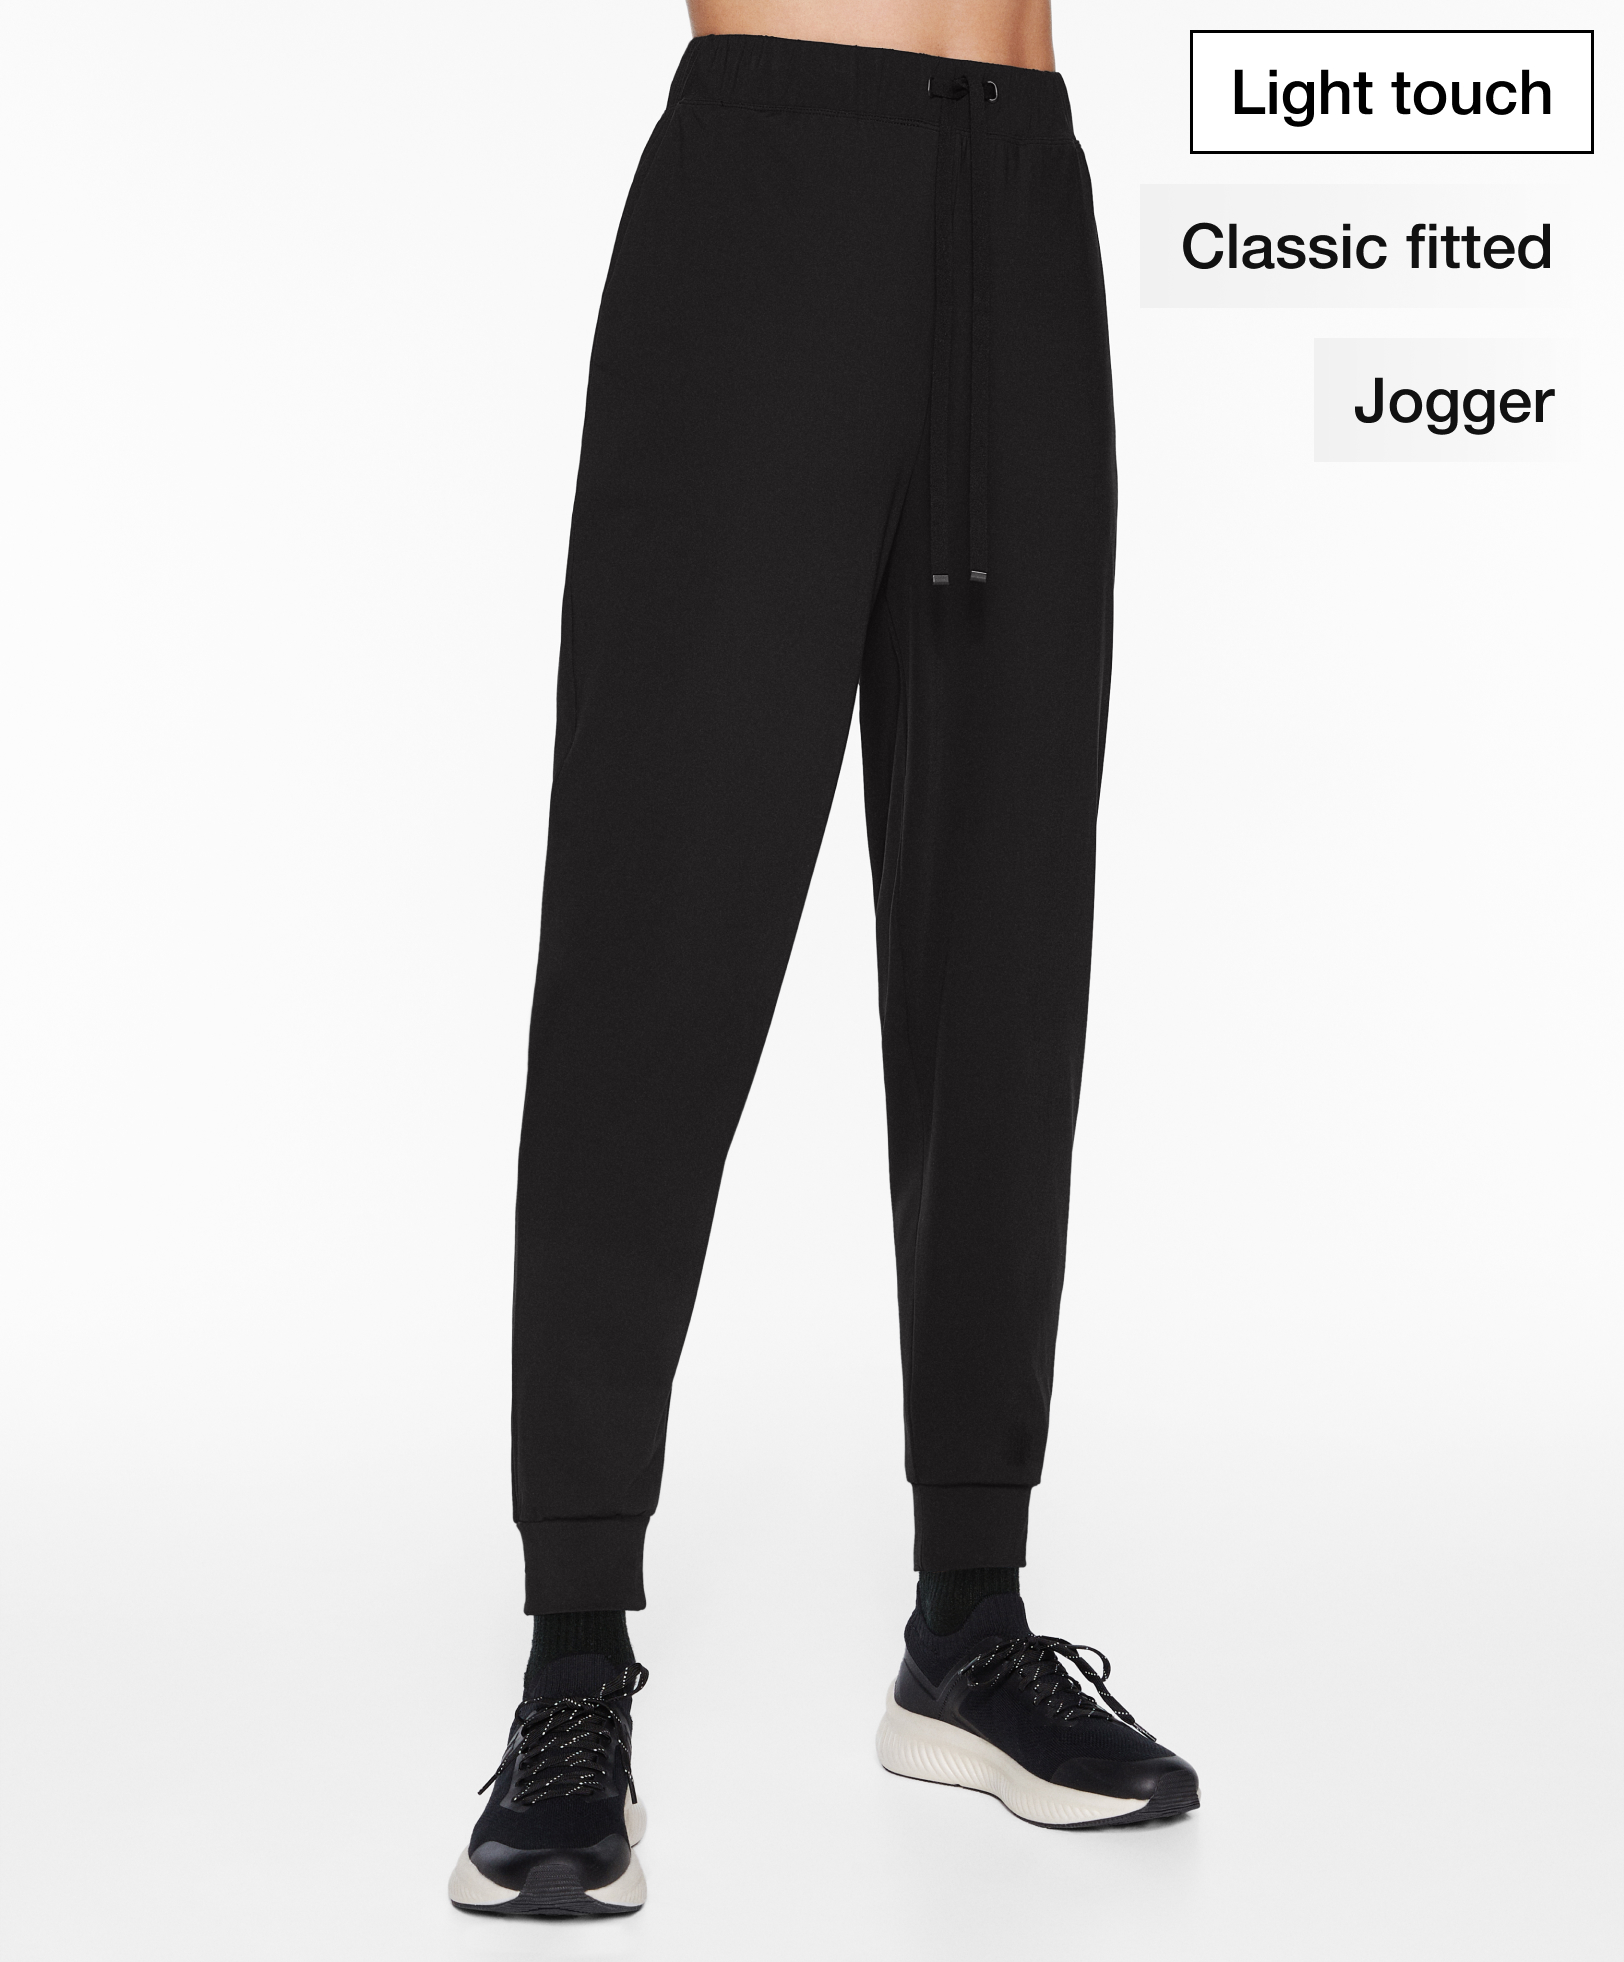 Classic light-touch fitted joggers